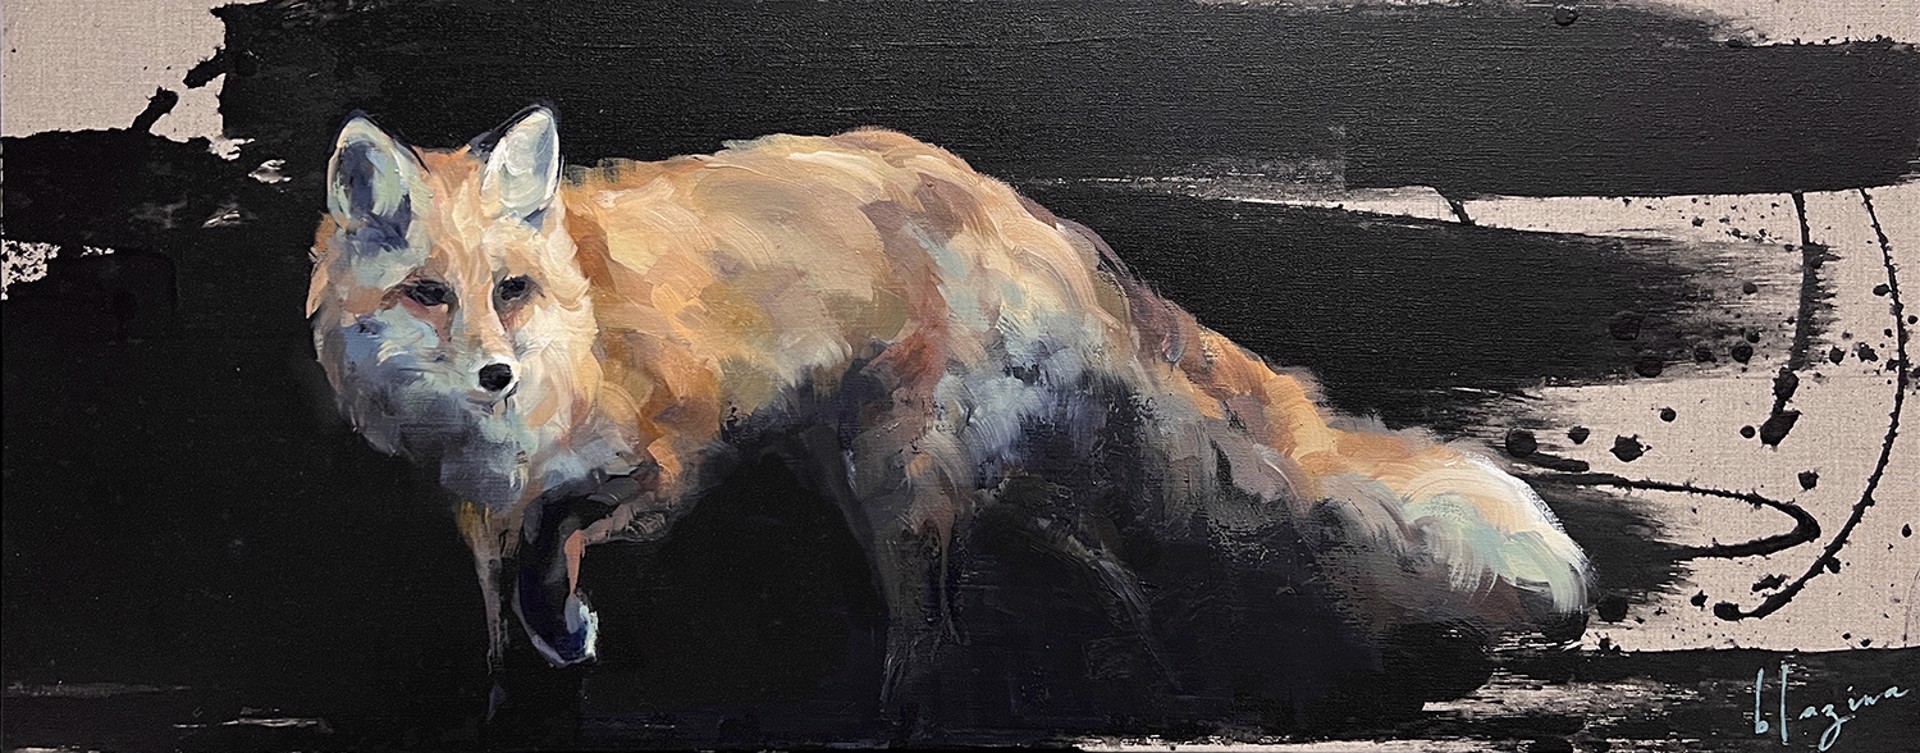 Red Fox walking though and abstract black background painted on linen.